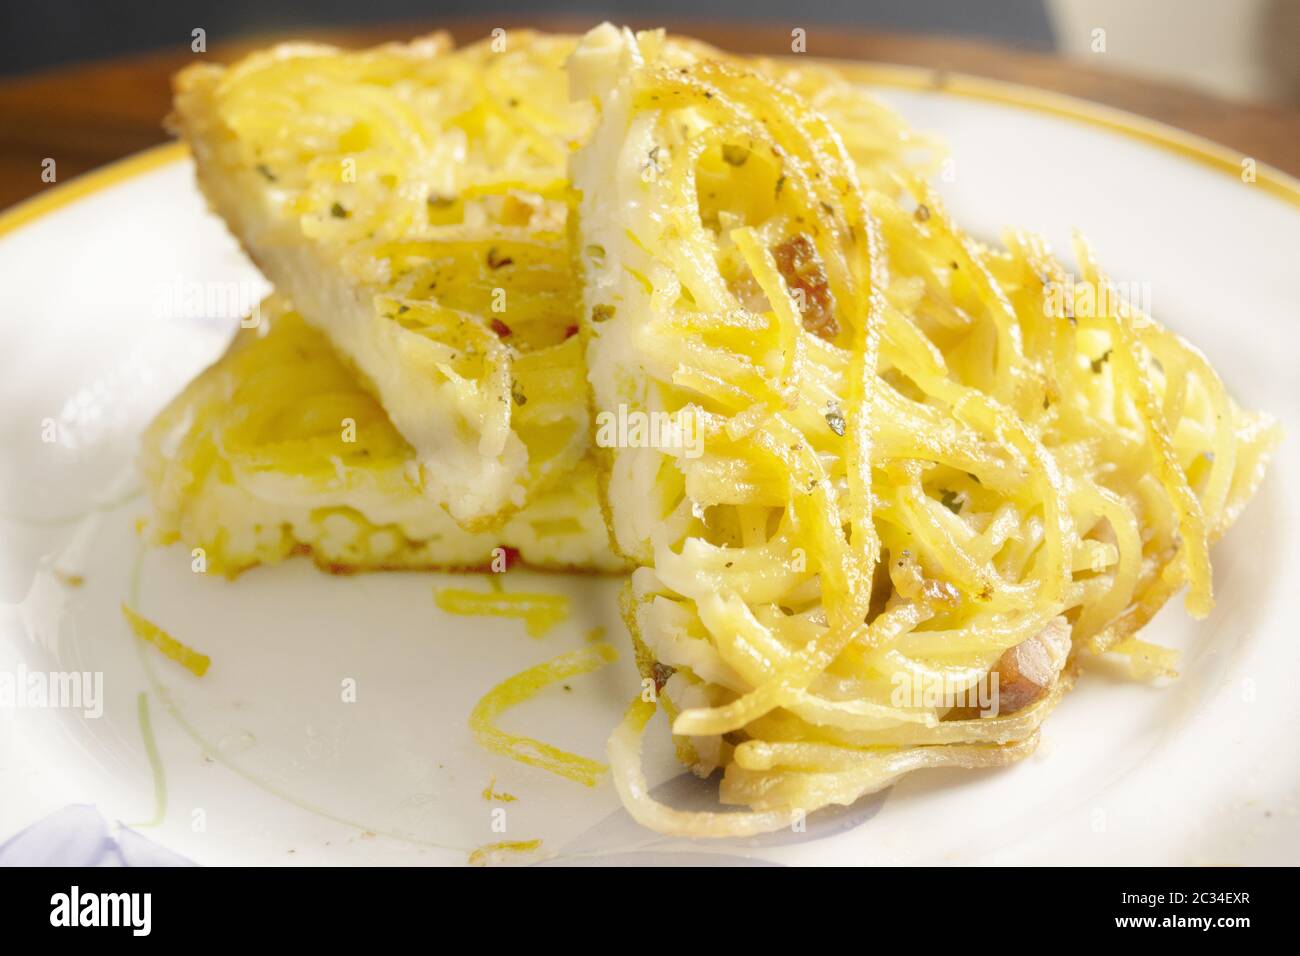 wedge of homemade omelette pasta in a dish Stock Photo